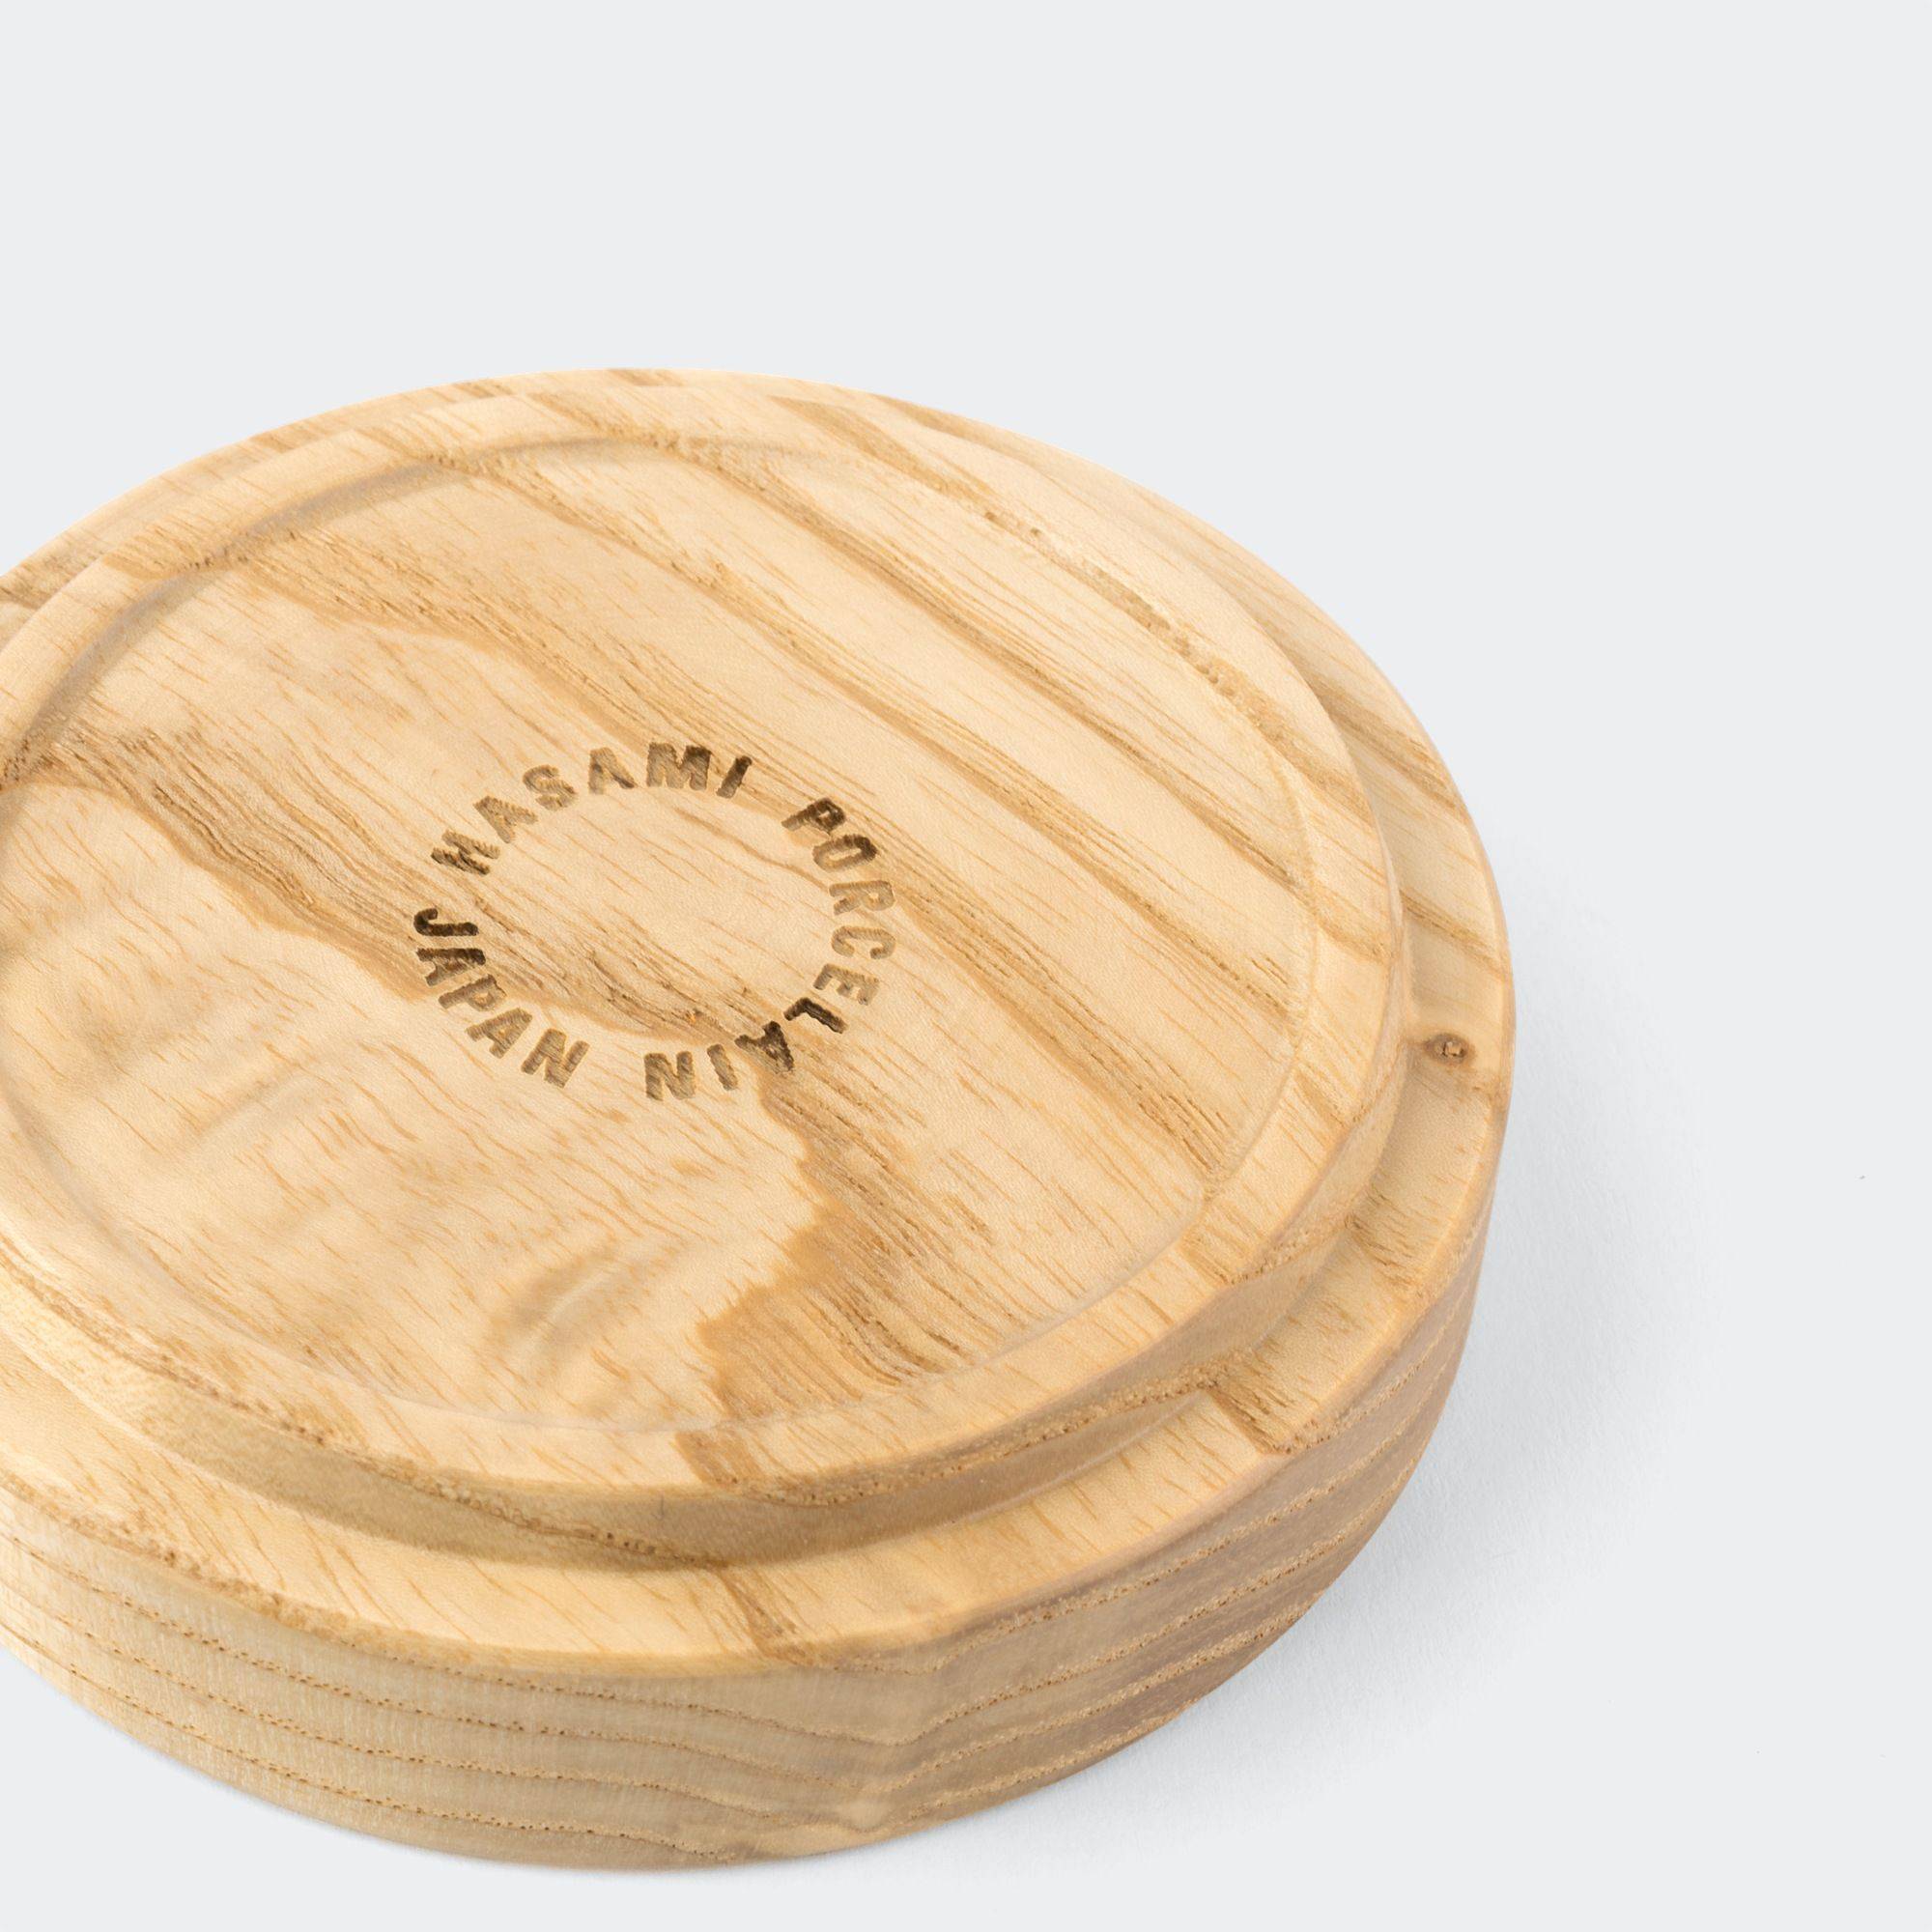 Hasami Wooden Coaster and Lid, Made in Japan